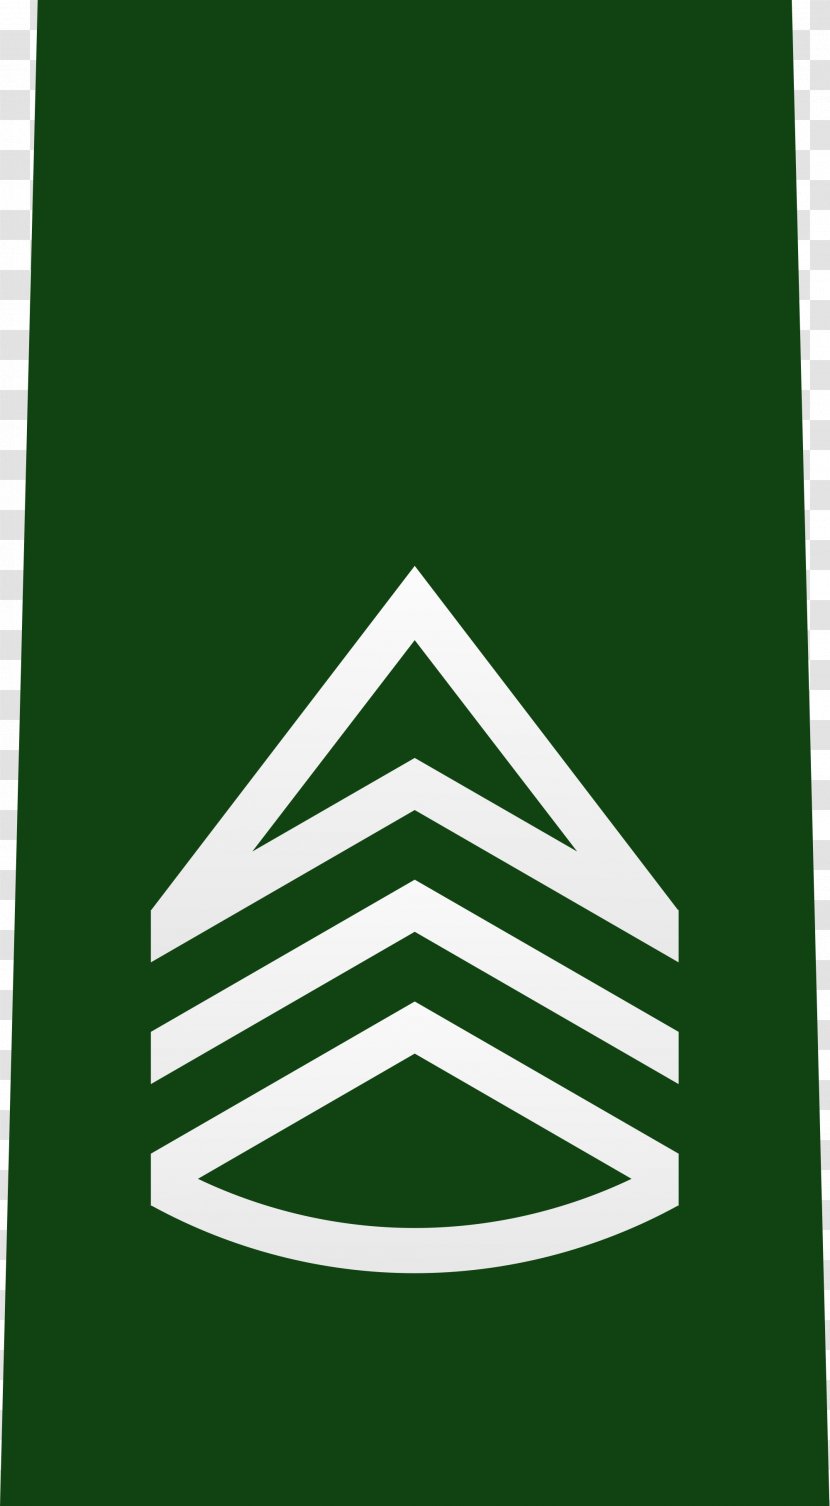 Senior Master Sergeant Major First - Military Rank - Triangle Transparent PNG